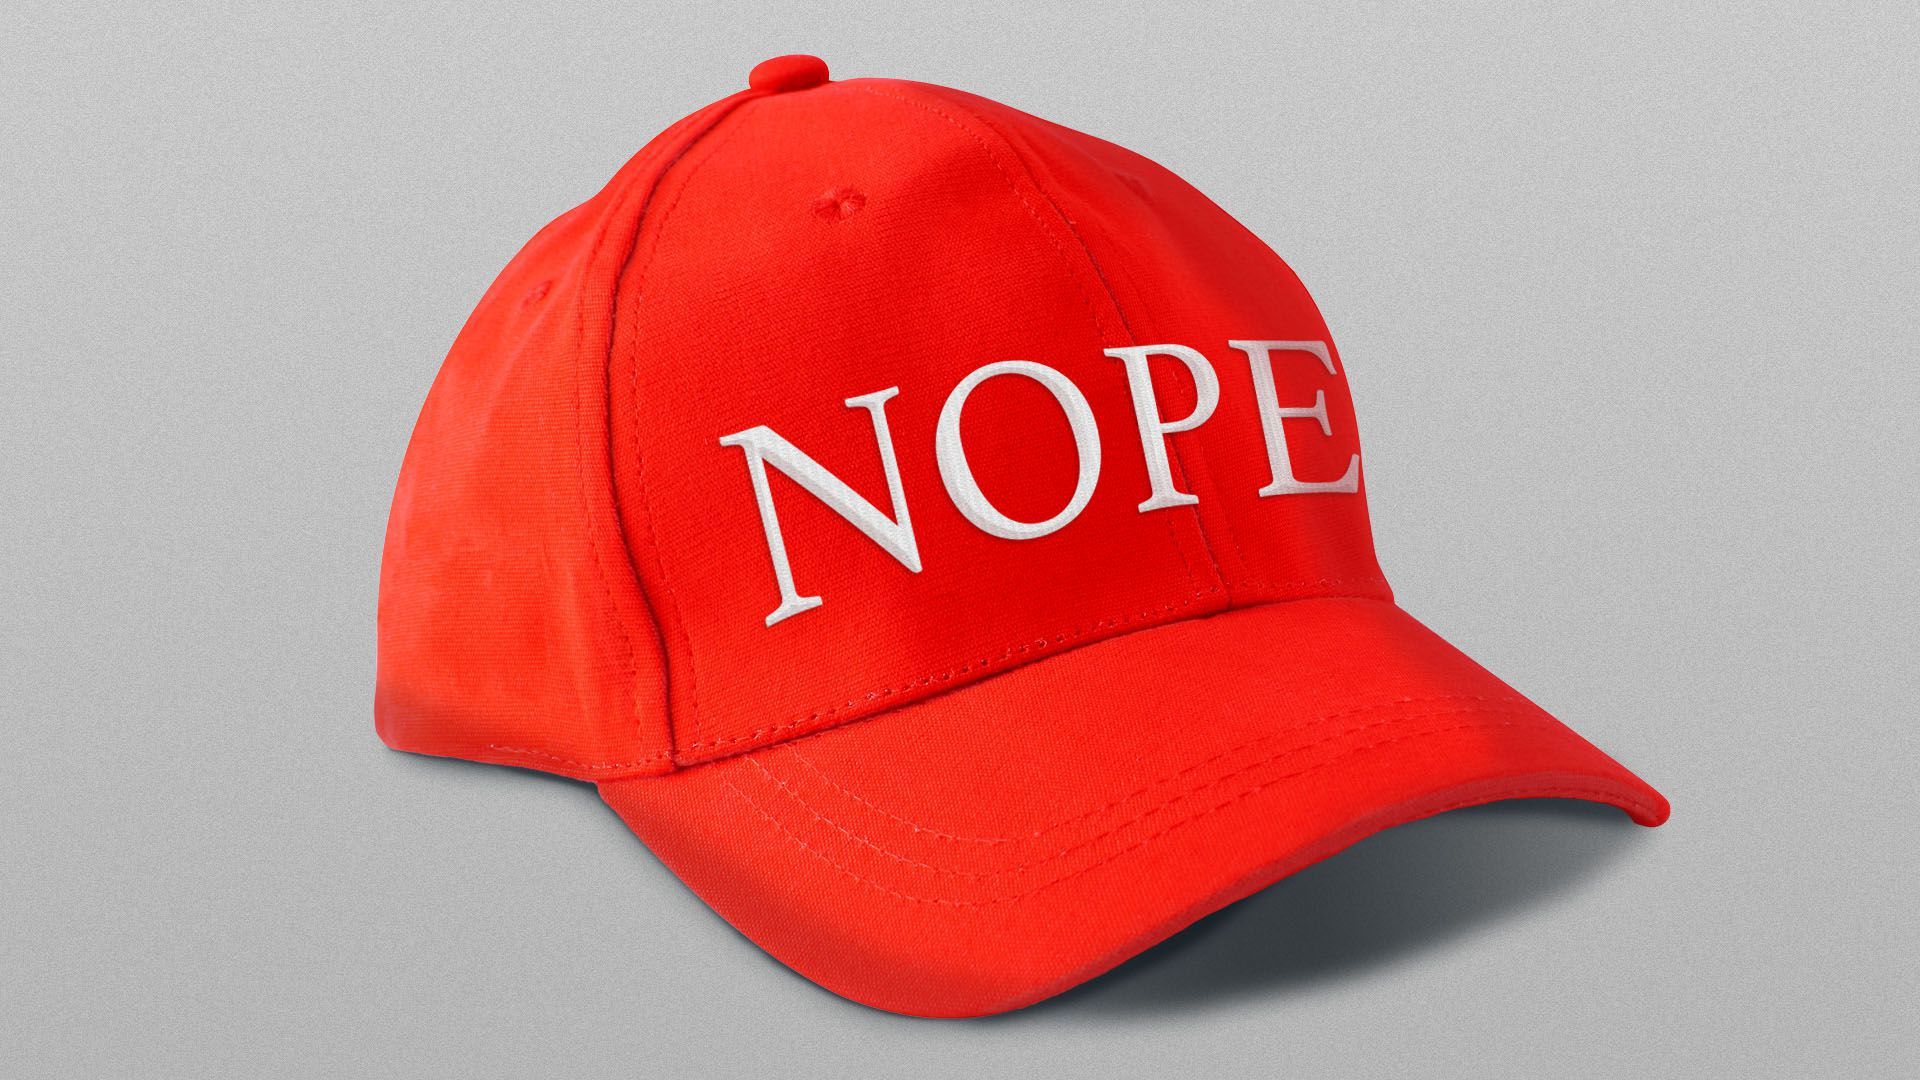 Red hat that says NOPE